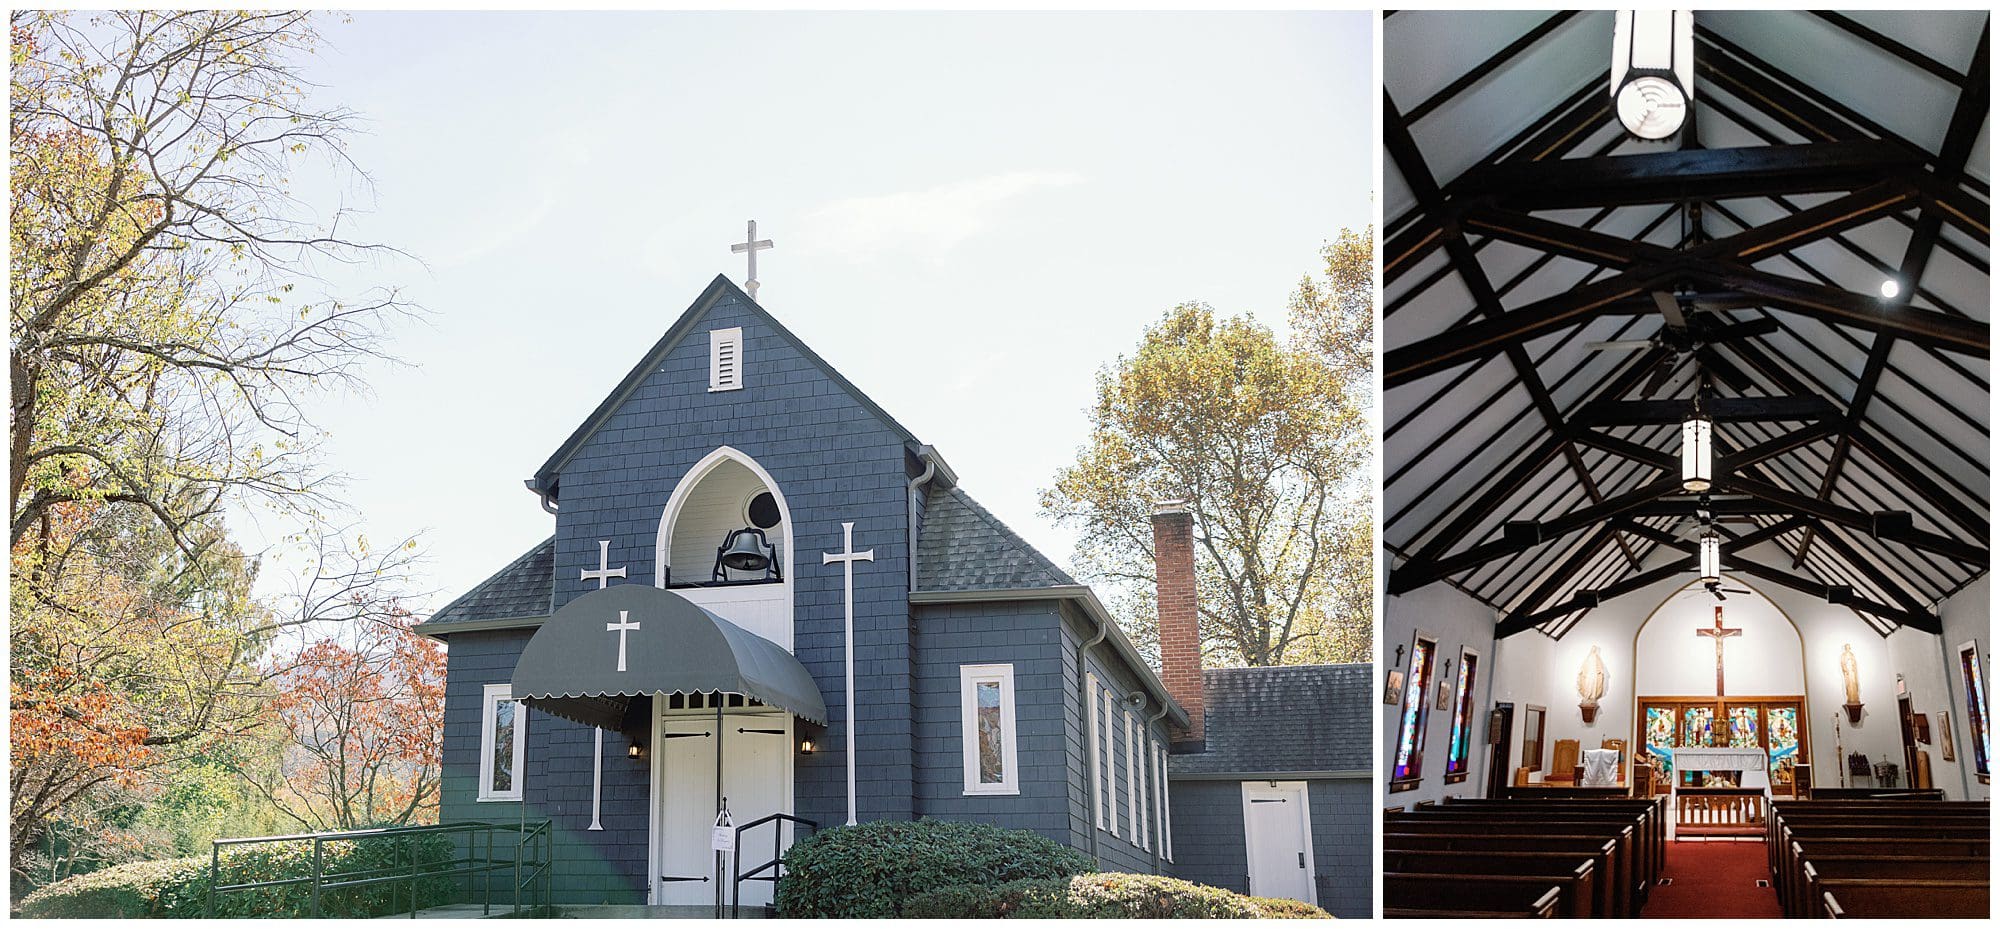 Split image depicting a small grey church with a white cross against an autumn backdrop on the left, and the church's interior showing wooden pews and a vaulted ceiling on the right.